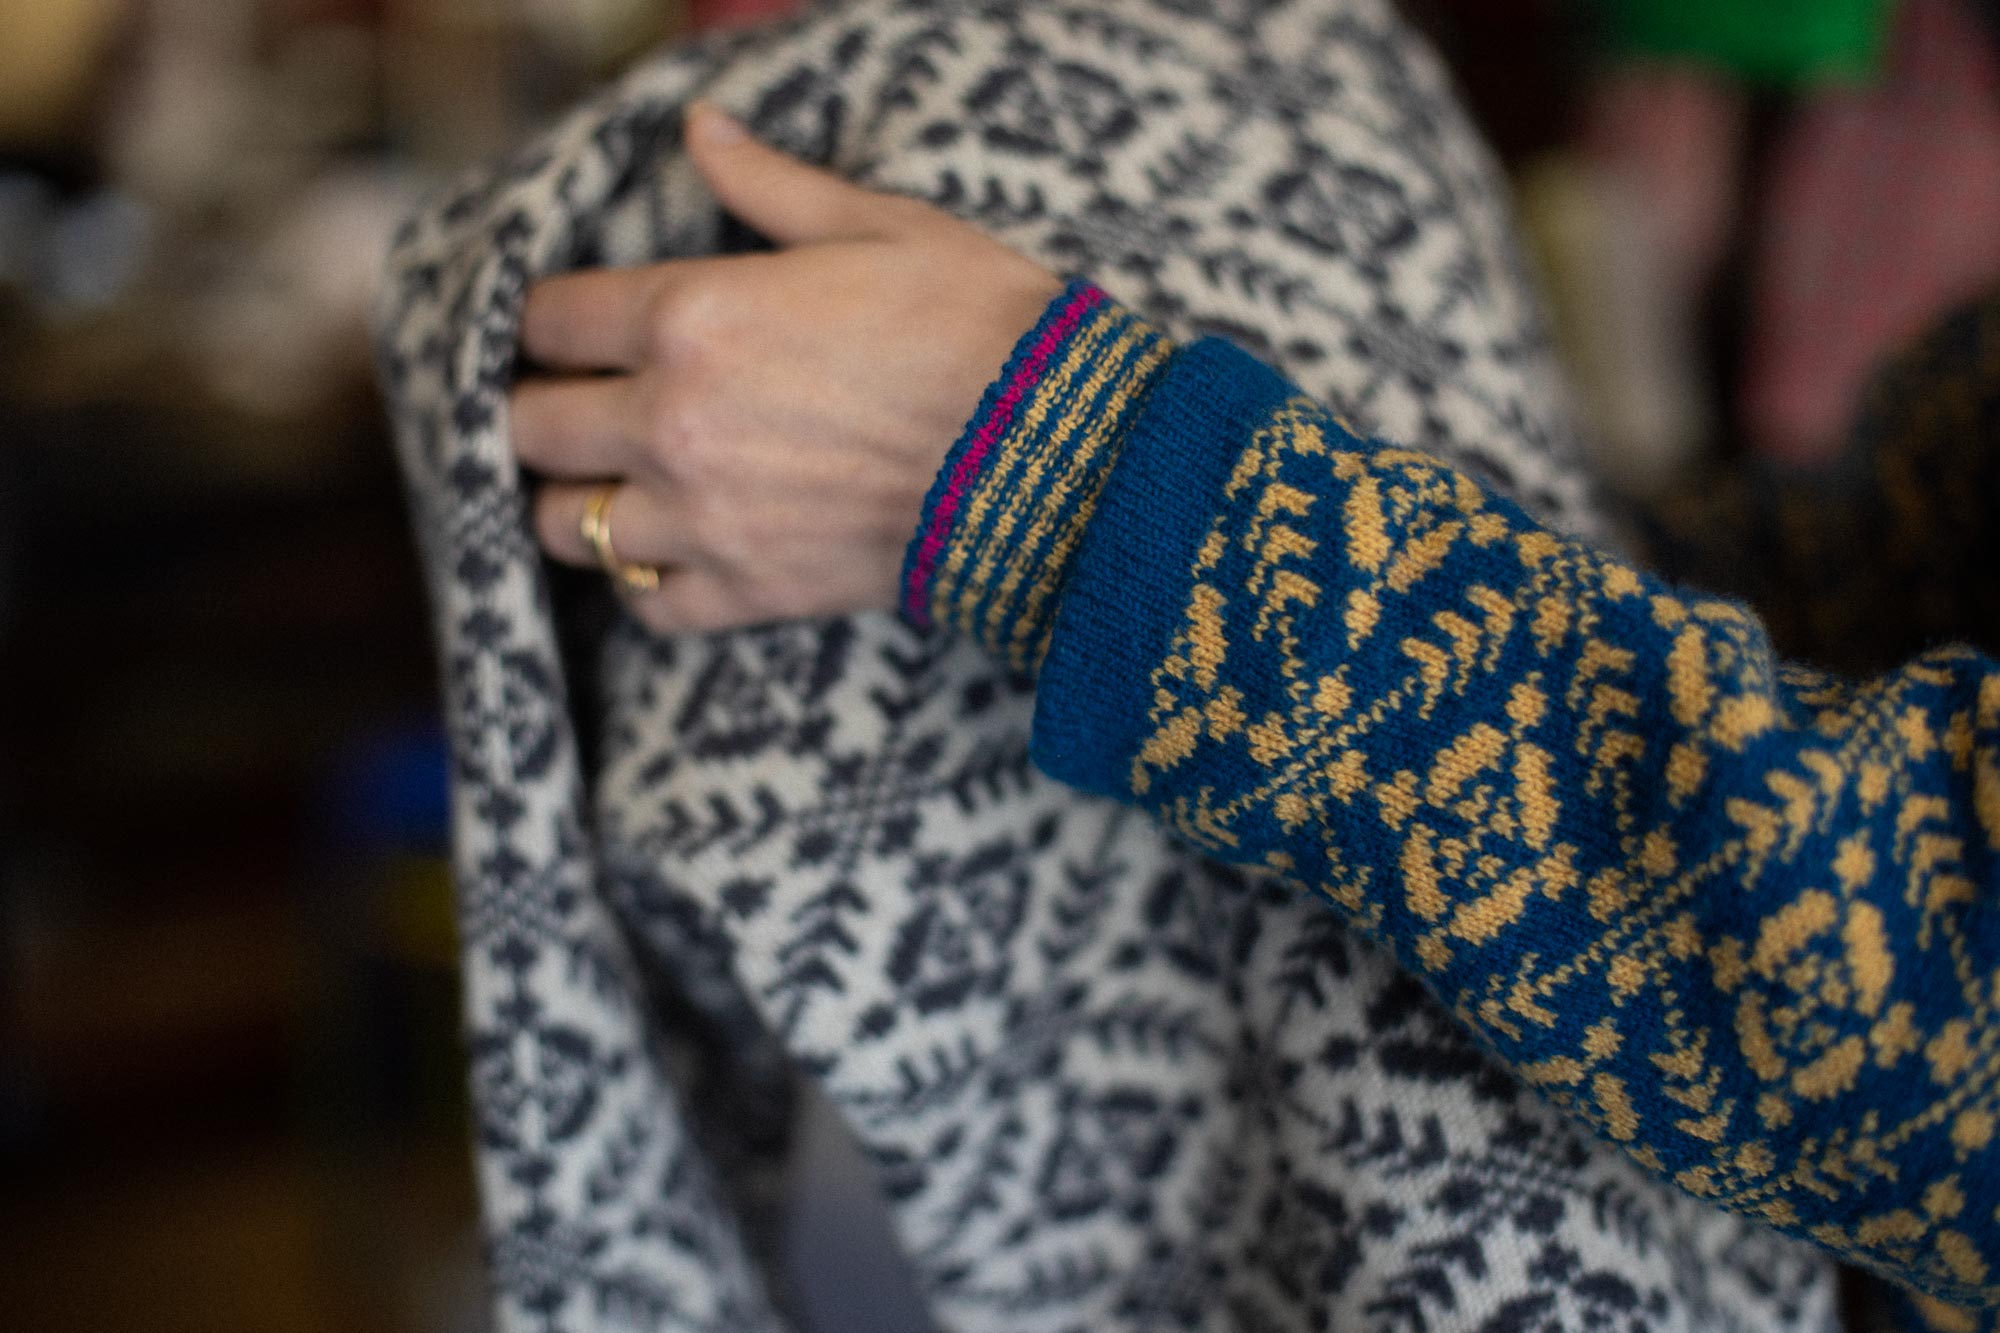 A studio assistant at Nielanell Shetland knitwear helps a customer try on a Fair Isle Style Shetland jumper. Just hands are seen. The assistant wears a yellow and blue patterned jumper, the one being tried on is an off white  Fair Isle Jumper with dark grey patterning.